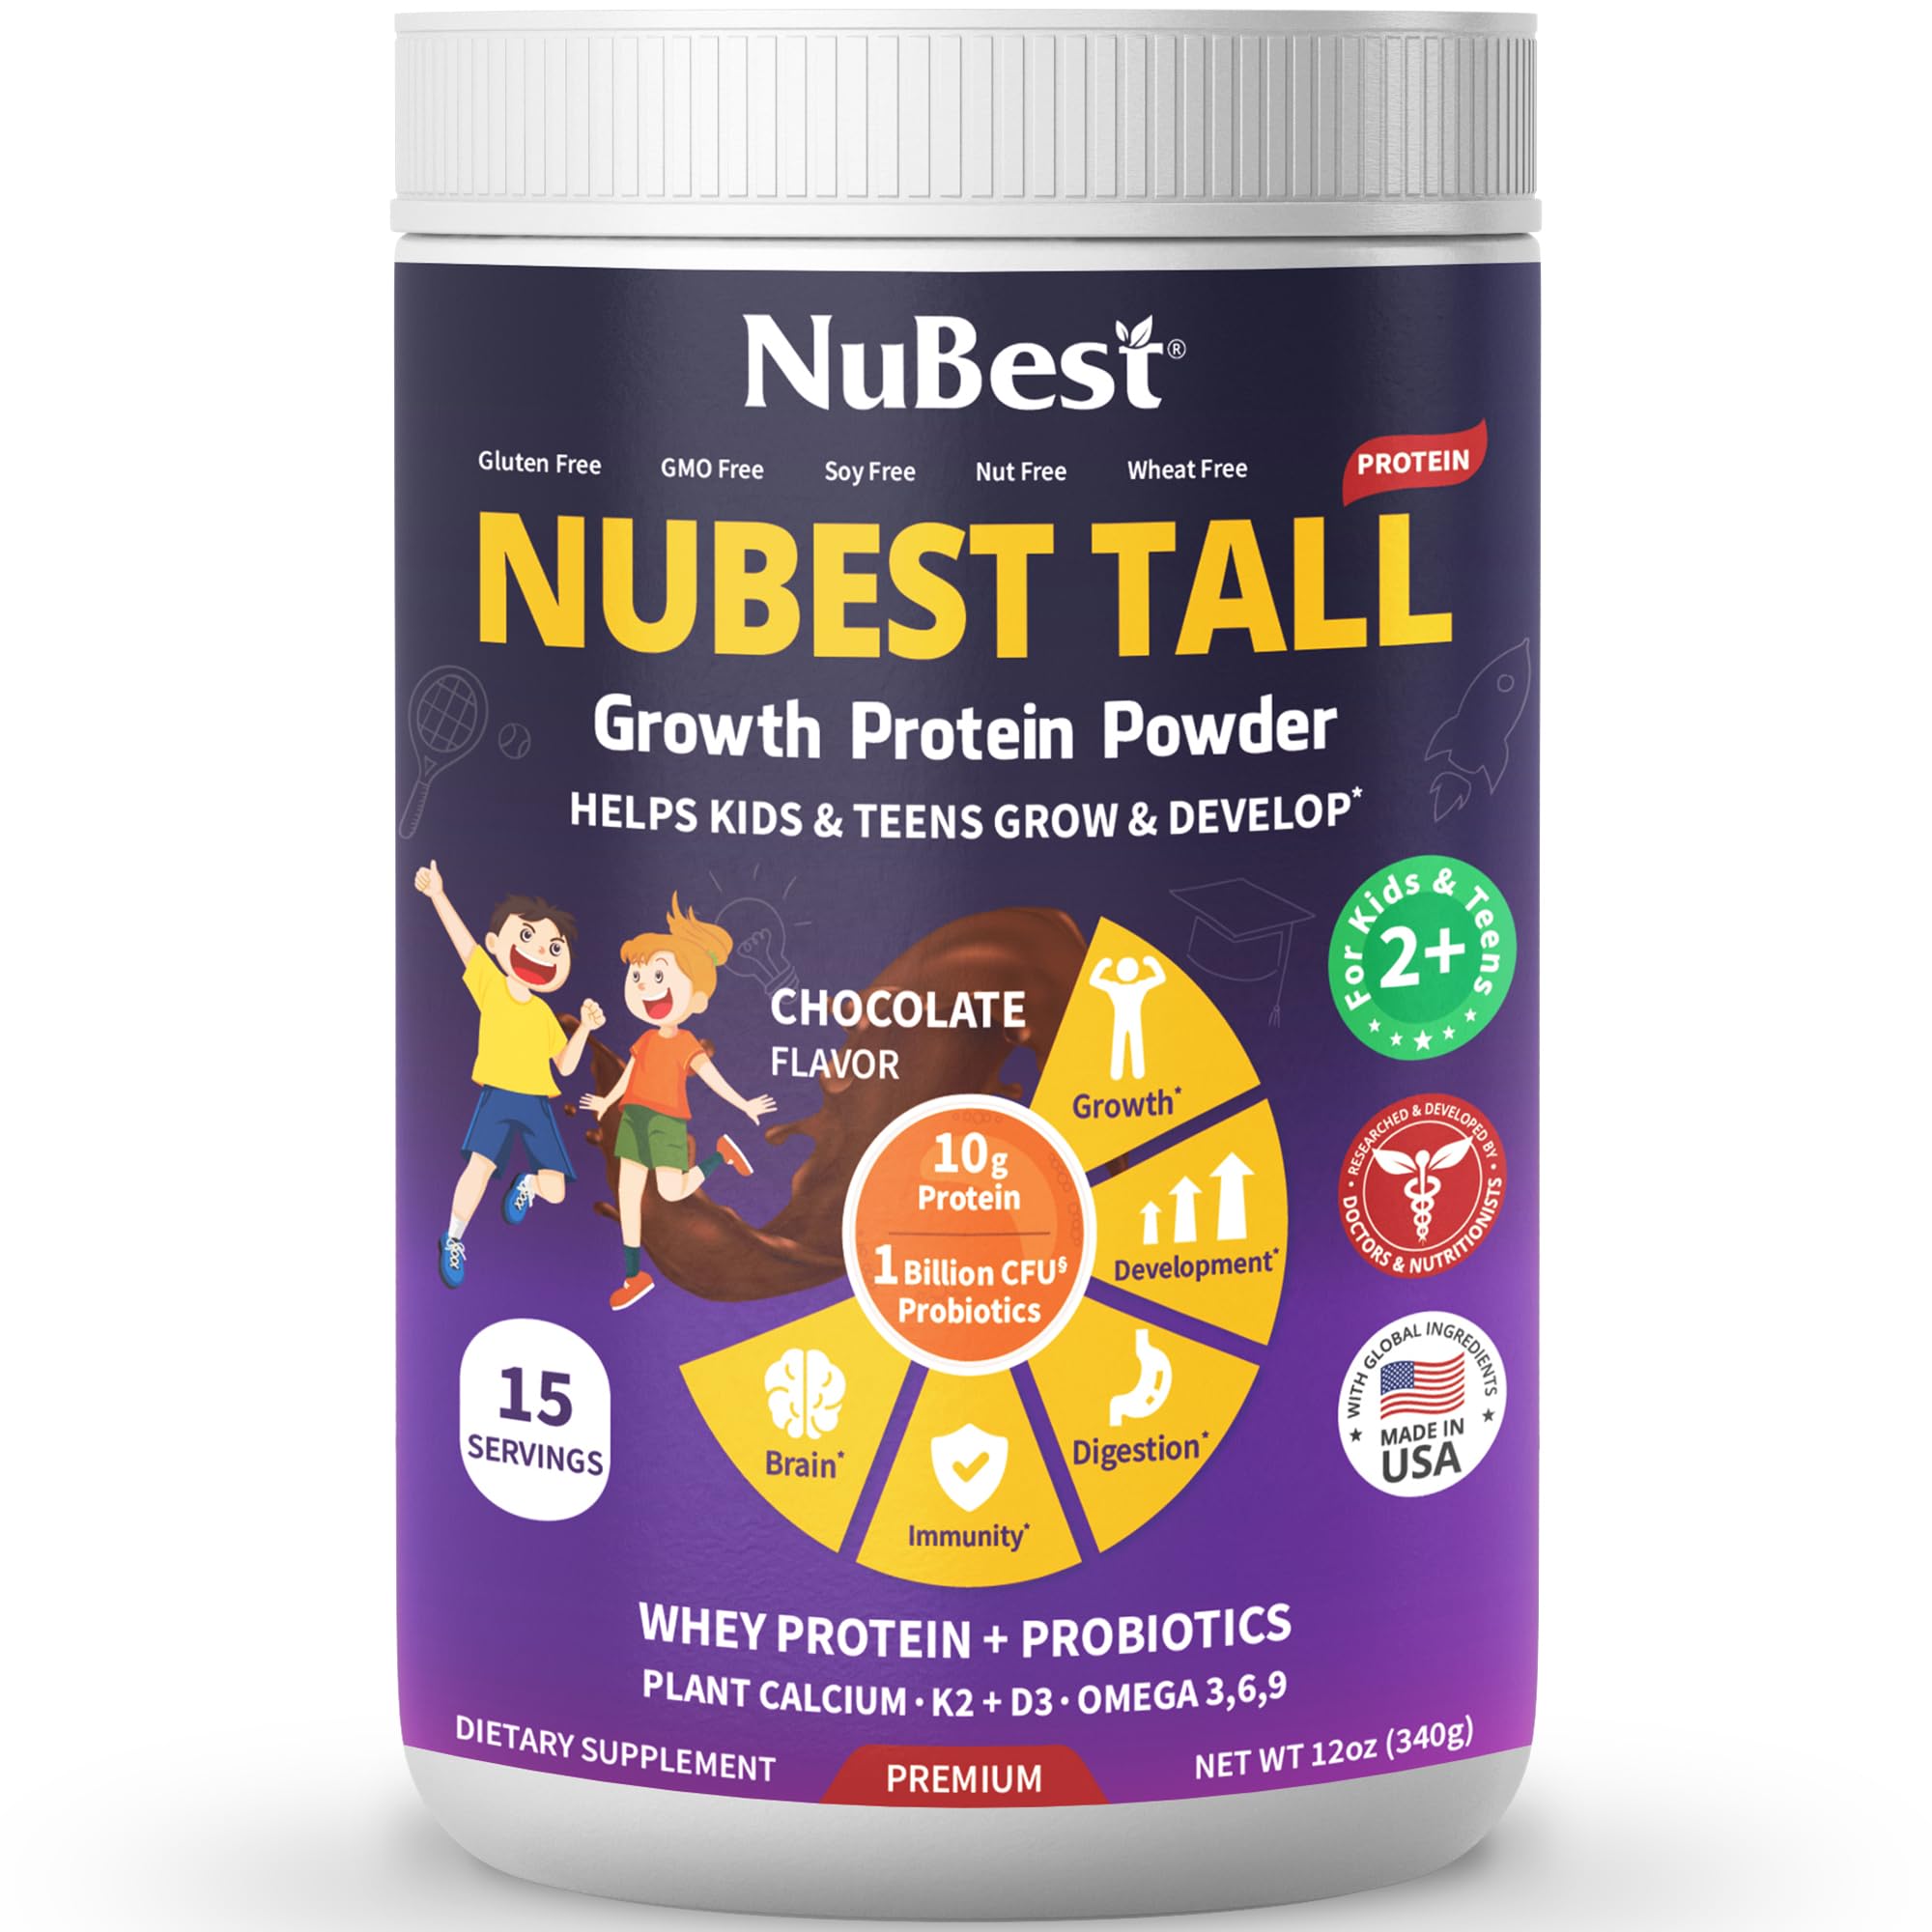 NuBest [1 Bottle Growth Protein Powder with Chocolate Flavor + 1 Bottle Tall Kids 90 Chewable Tablets with Berry Flavor] Bundle Height Growth for Kids - Support Height Growth, Development and Grow